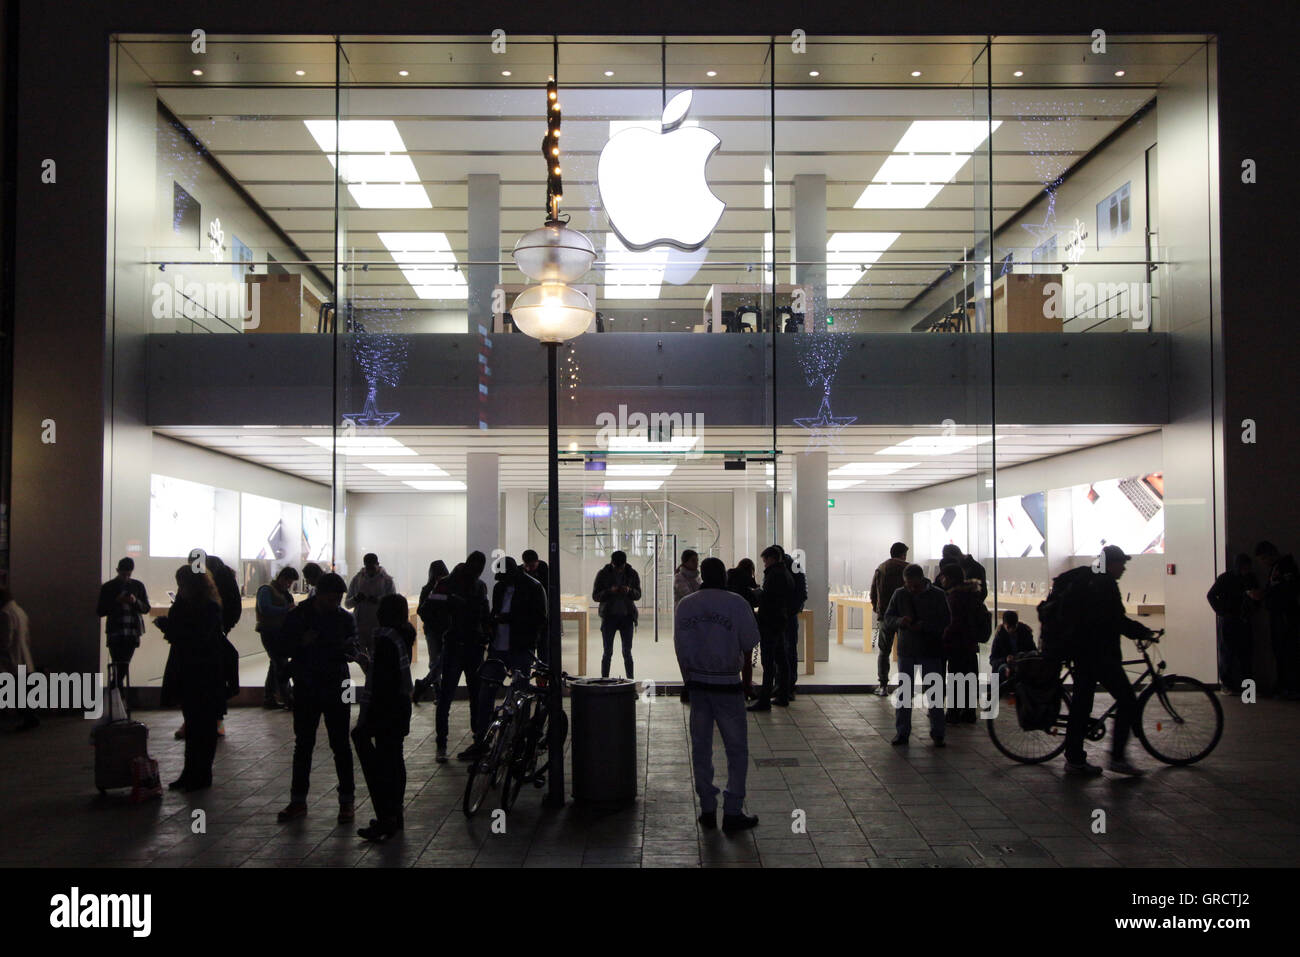 Group Of People Using Hot Spot At A Closed Apple Store In Munich At Night Stock Photo